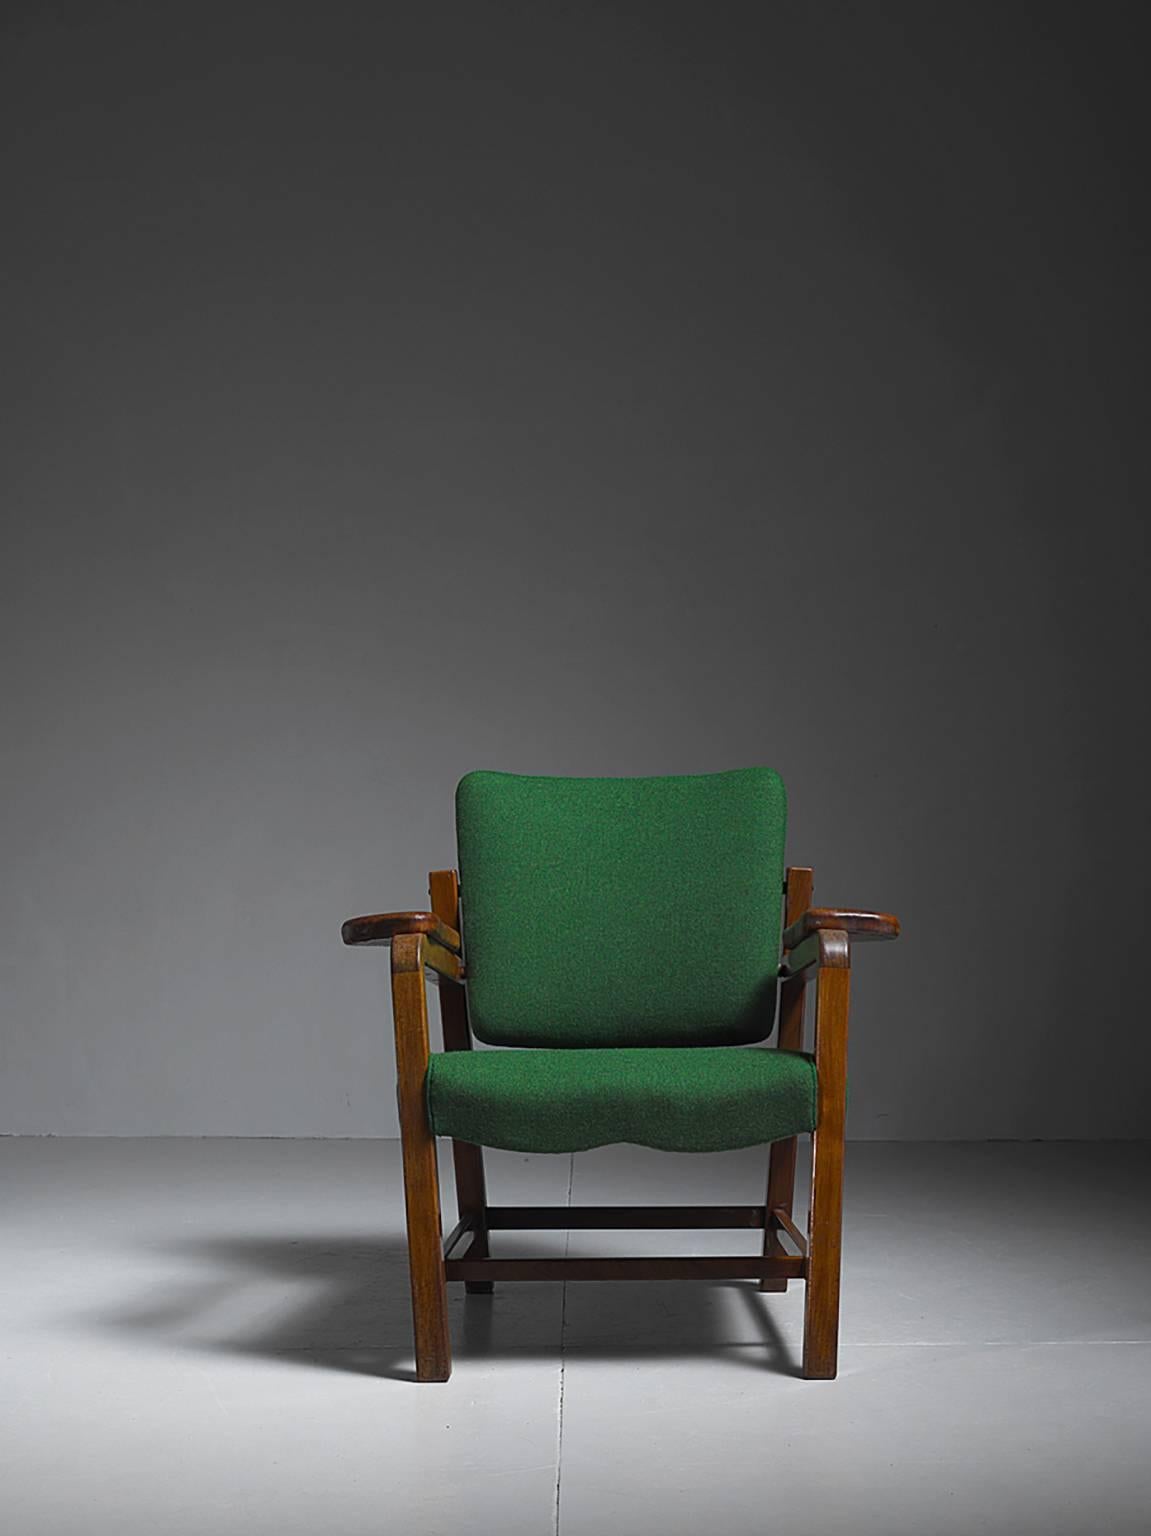 Danish Flemming Teisen Mahogany Chair with Leather Armrests, Denmark, 1939 For Sale